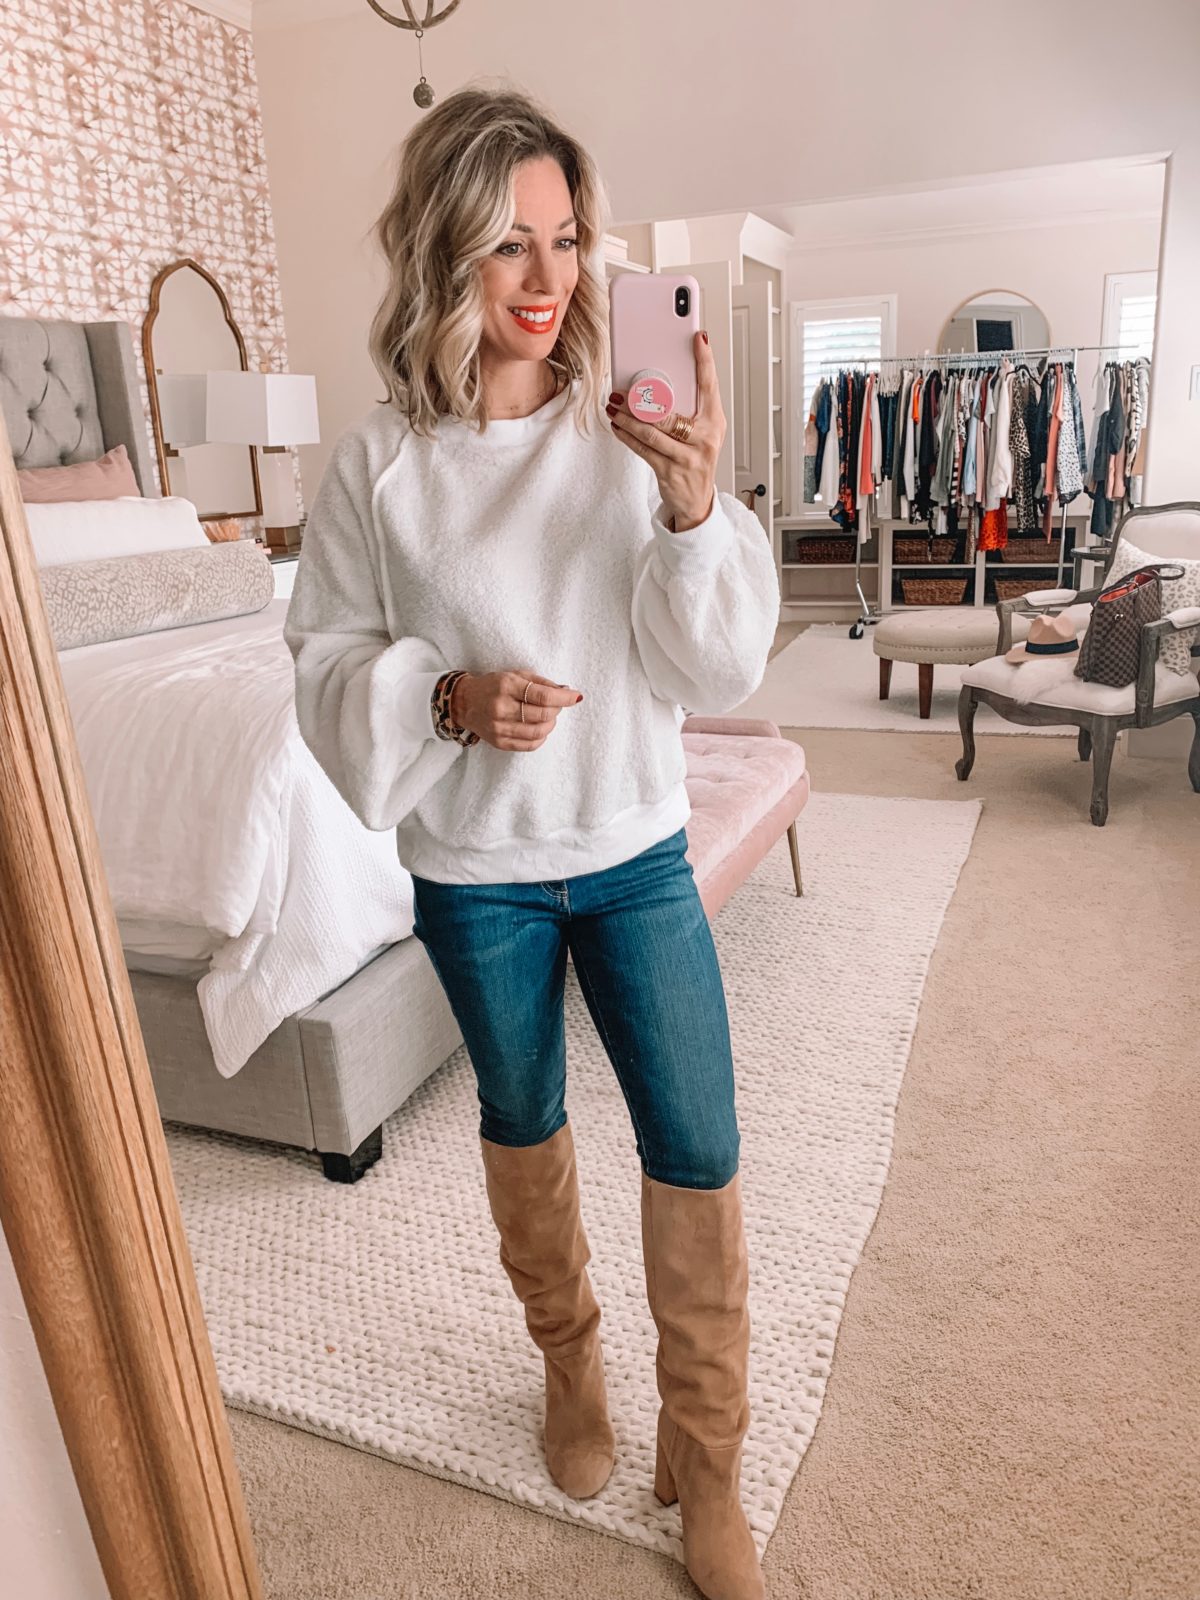 Amazon Prime Fashion- Sweater and Jeans 